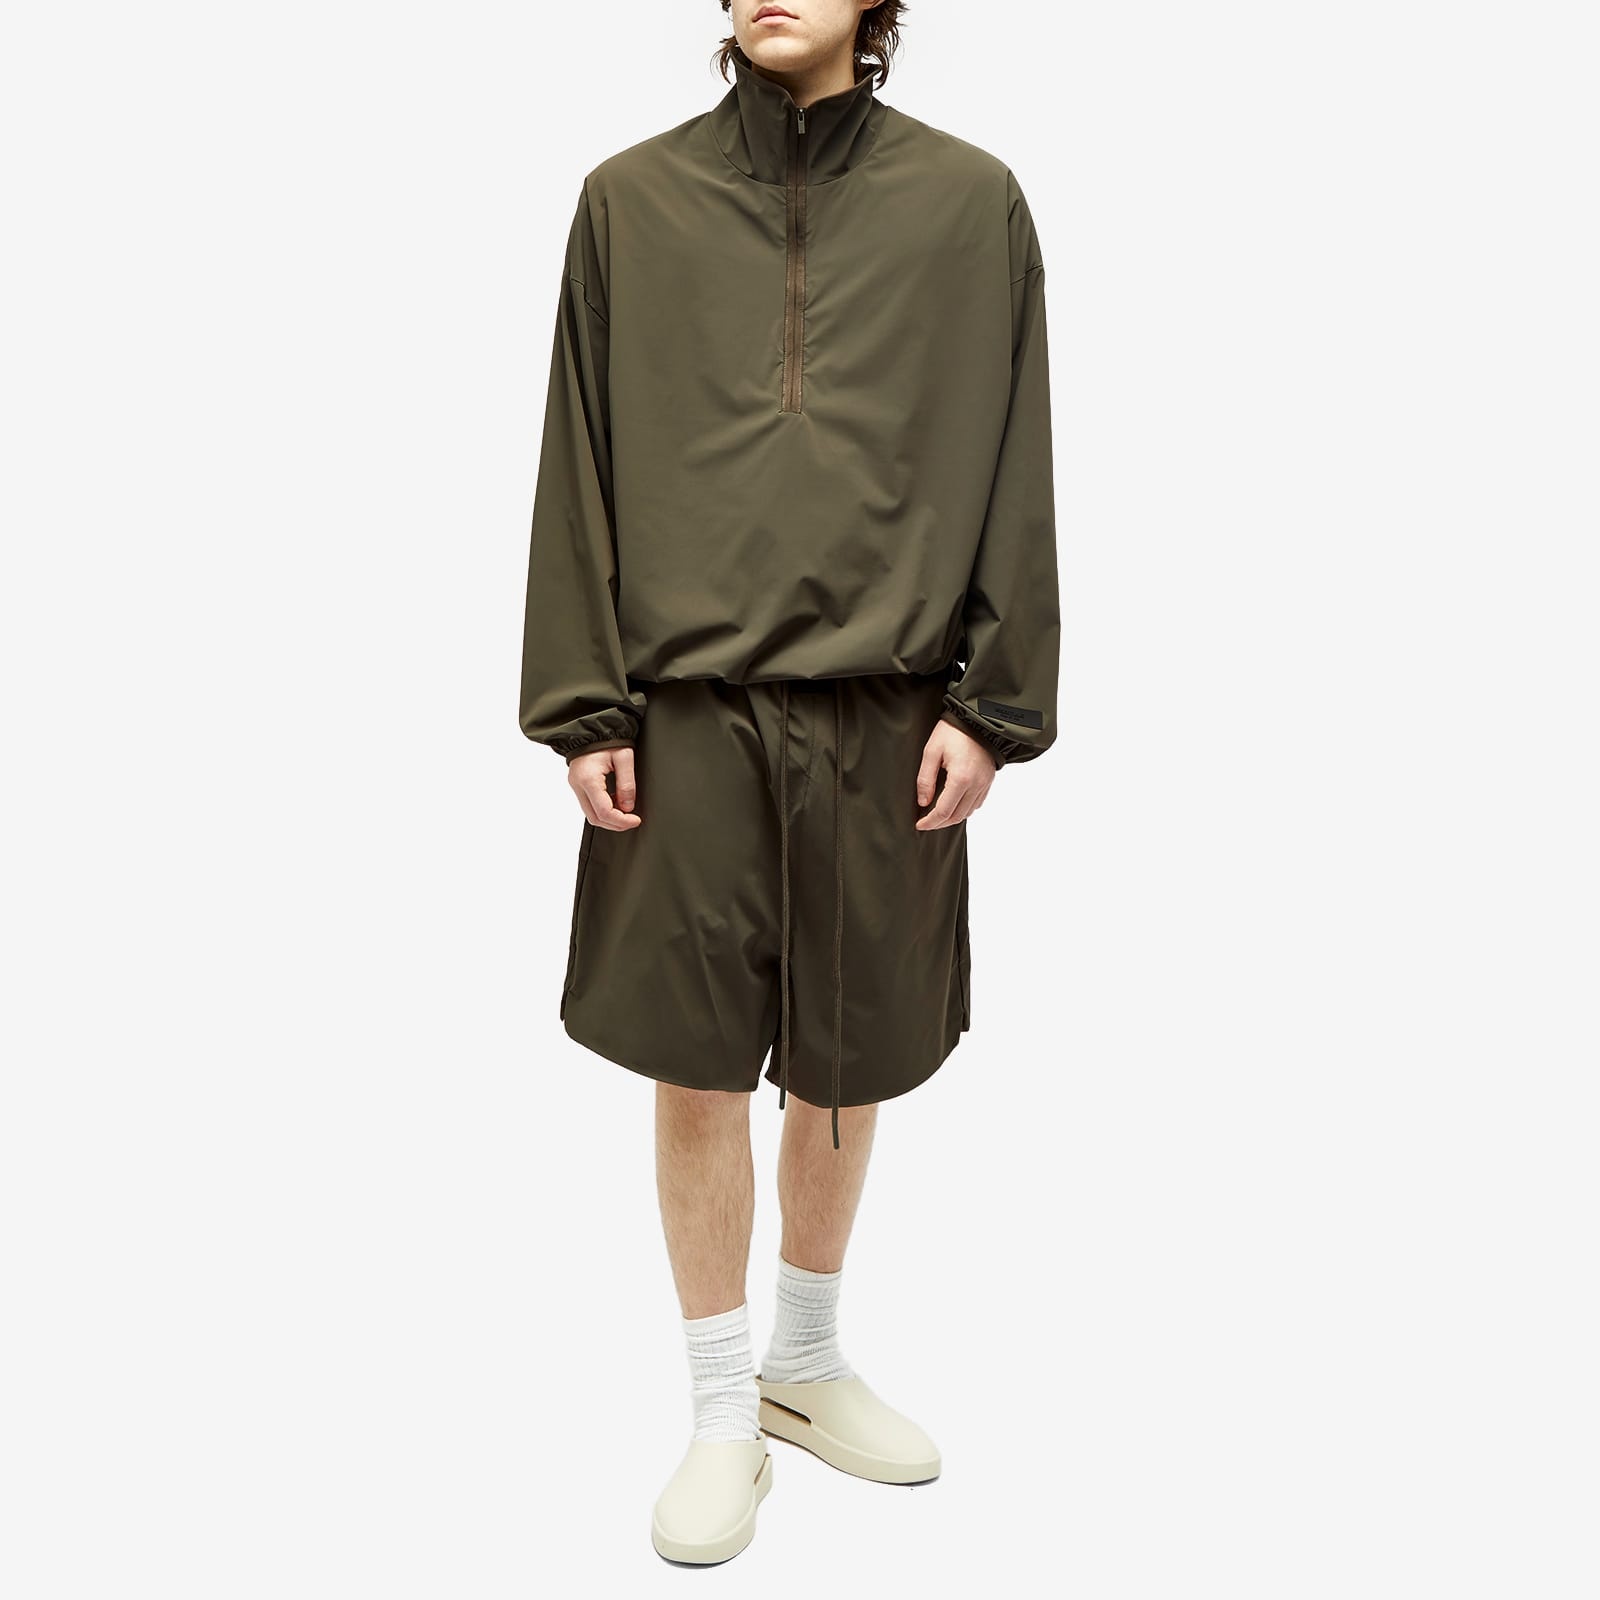 Fear of God ESSENTIALS Spring Nylon Relaxed Shorts - 4